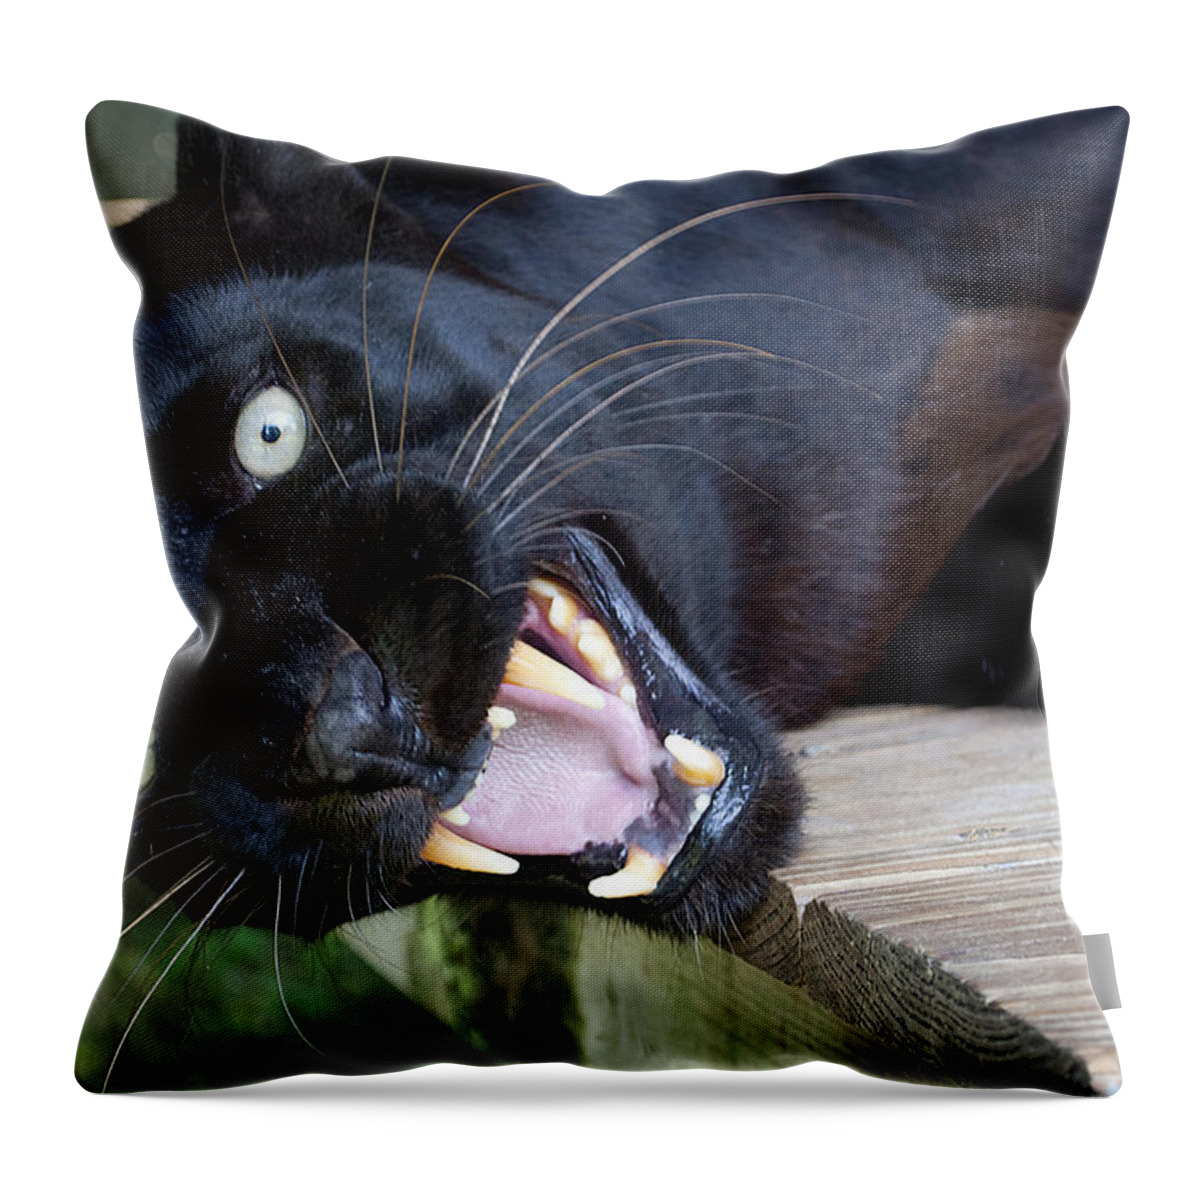 Angry Black Panther Throw Pillow by Kenneth Albin - Pixels